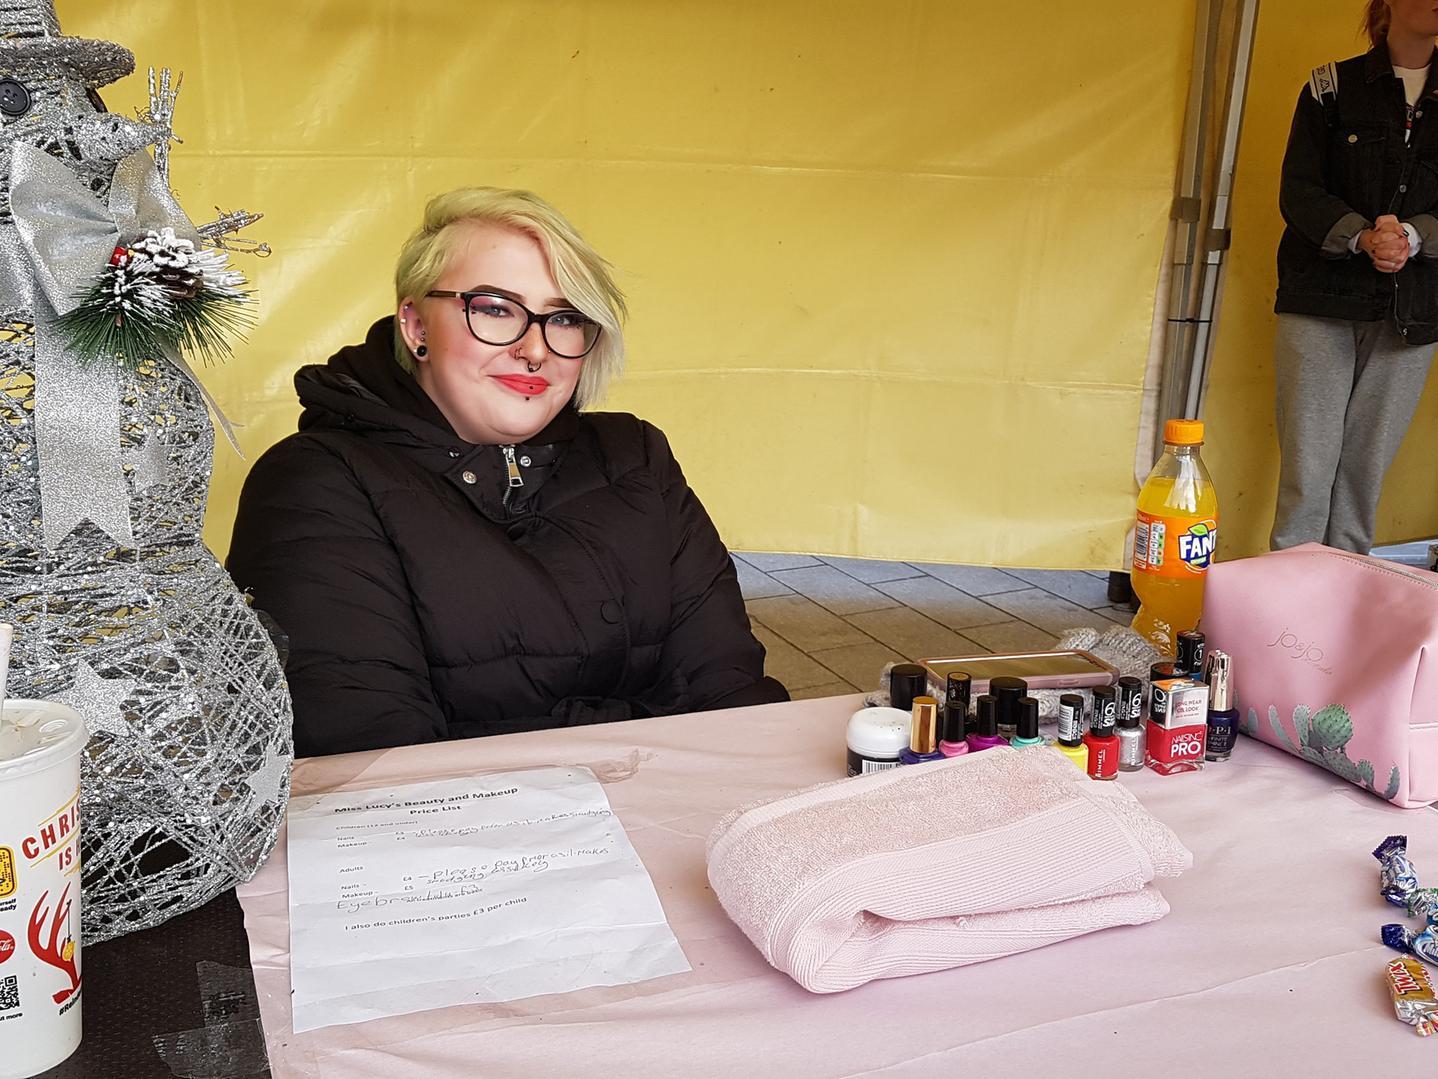 Lucy McElhinney, 17, runs a make-up artist business and was at the market with a make-over stall. She is studying production arts at Kettering Tresham College and started her make-up business as a way to get more practise.